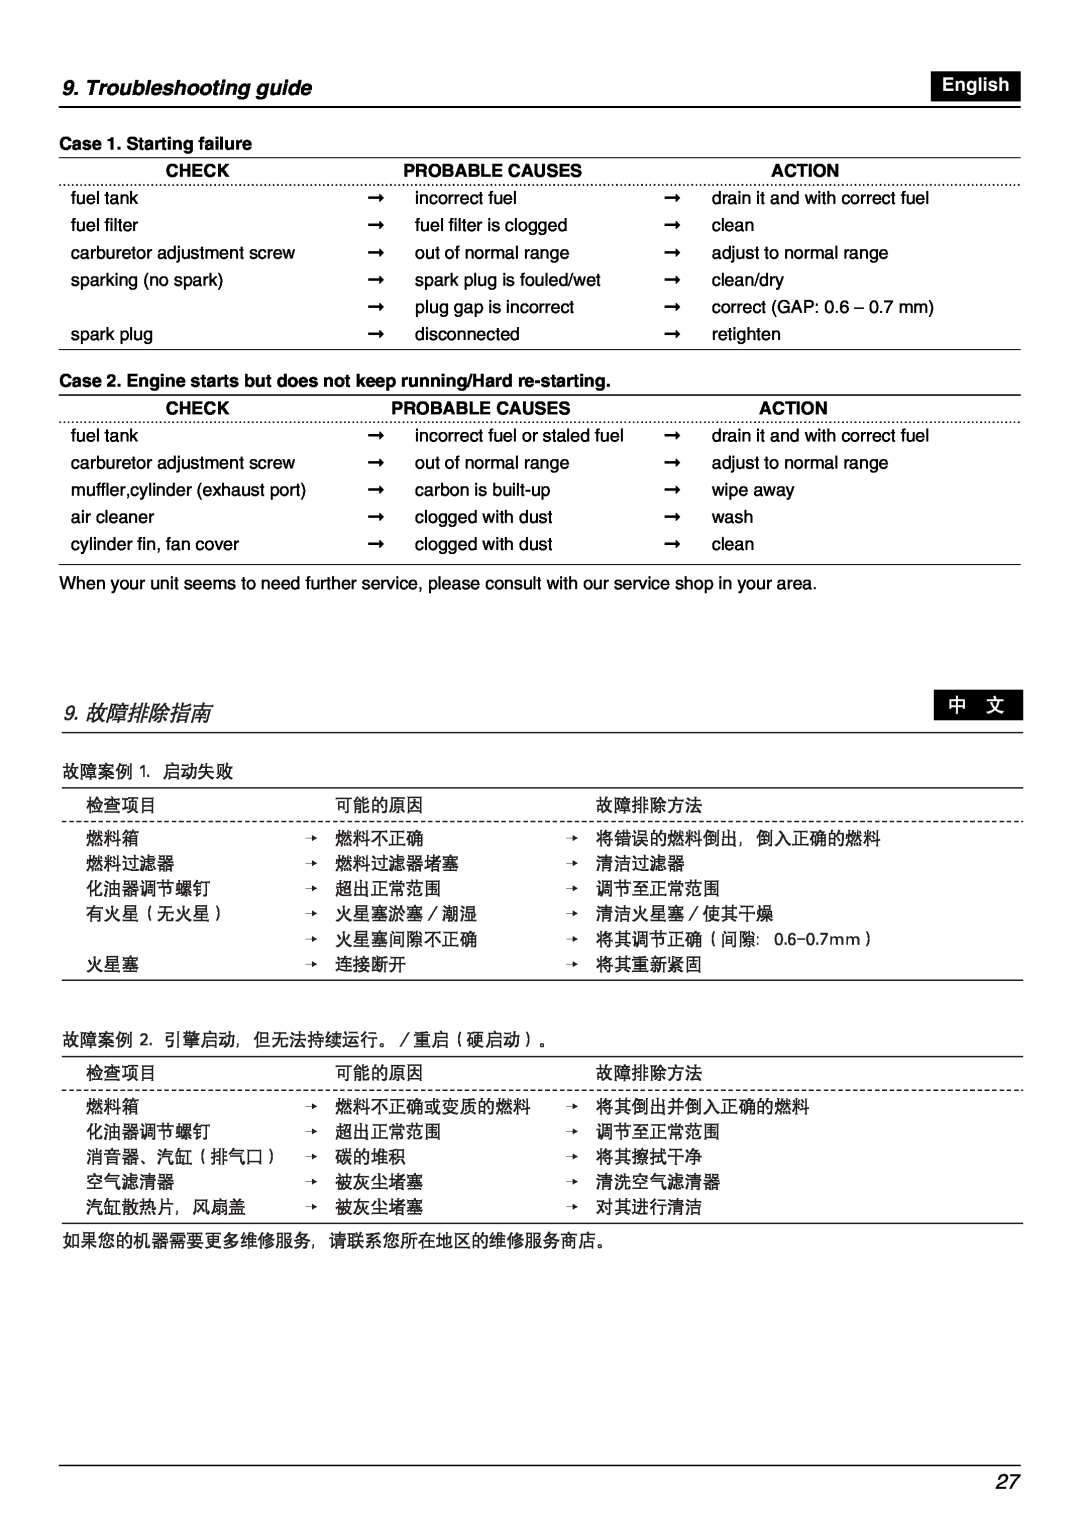 Zenoah PSJ2300 Troubleshooting guide, Case 1. Starting failure, Check, Probable Causes, Action, 9. 故障排除指南, English 